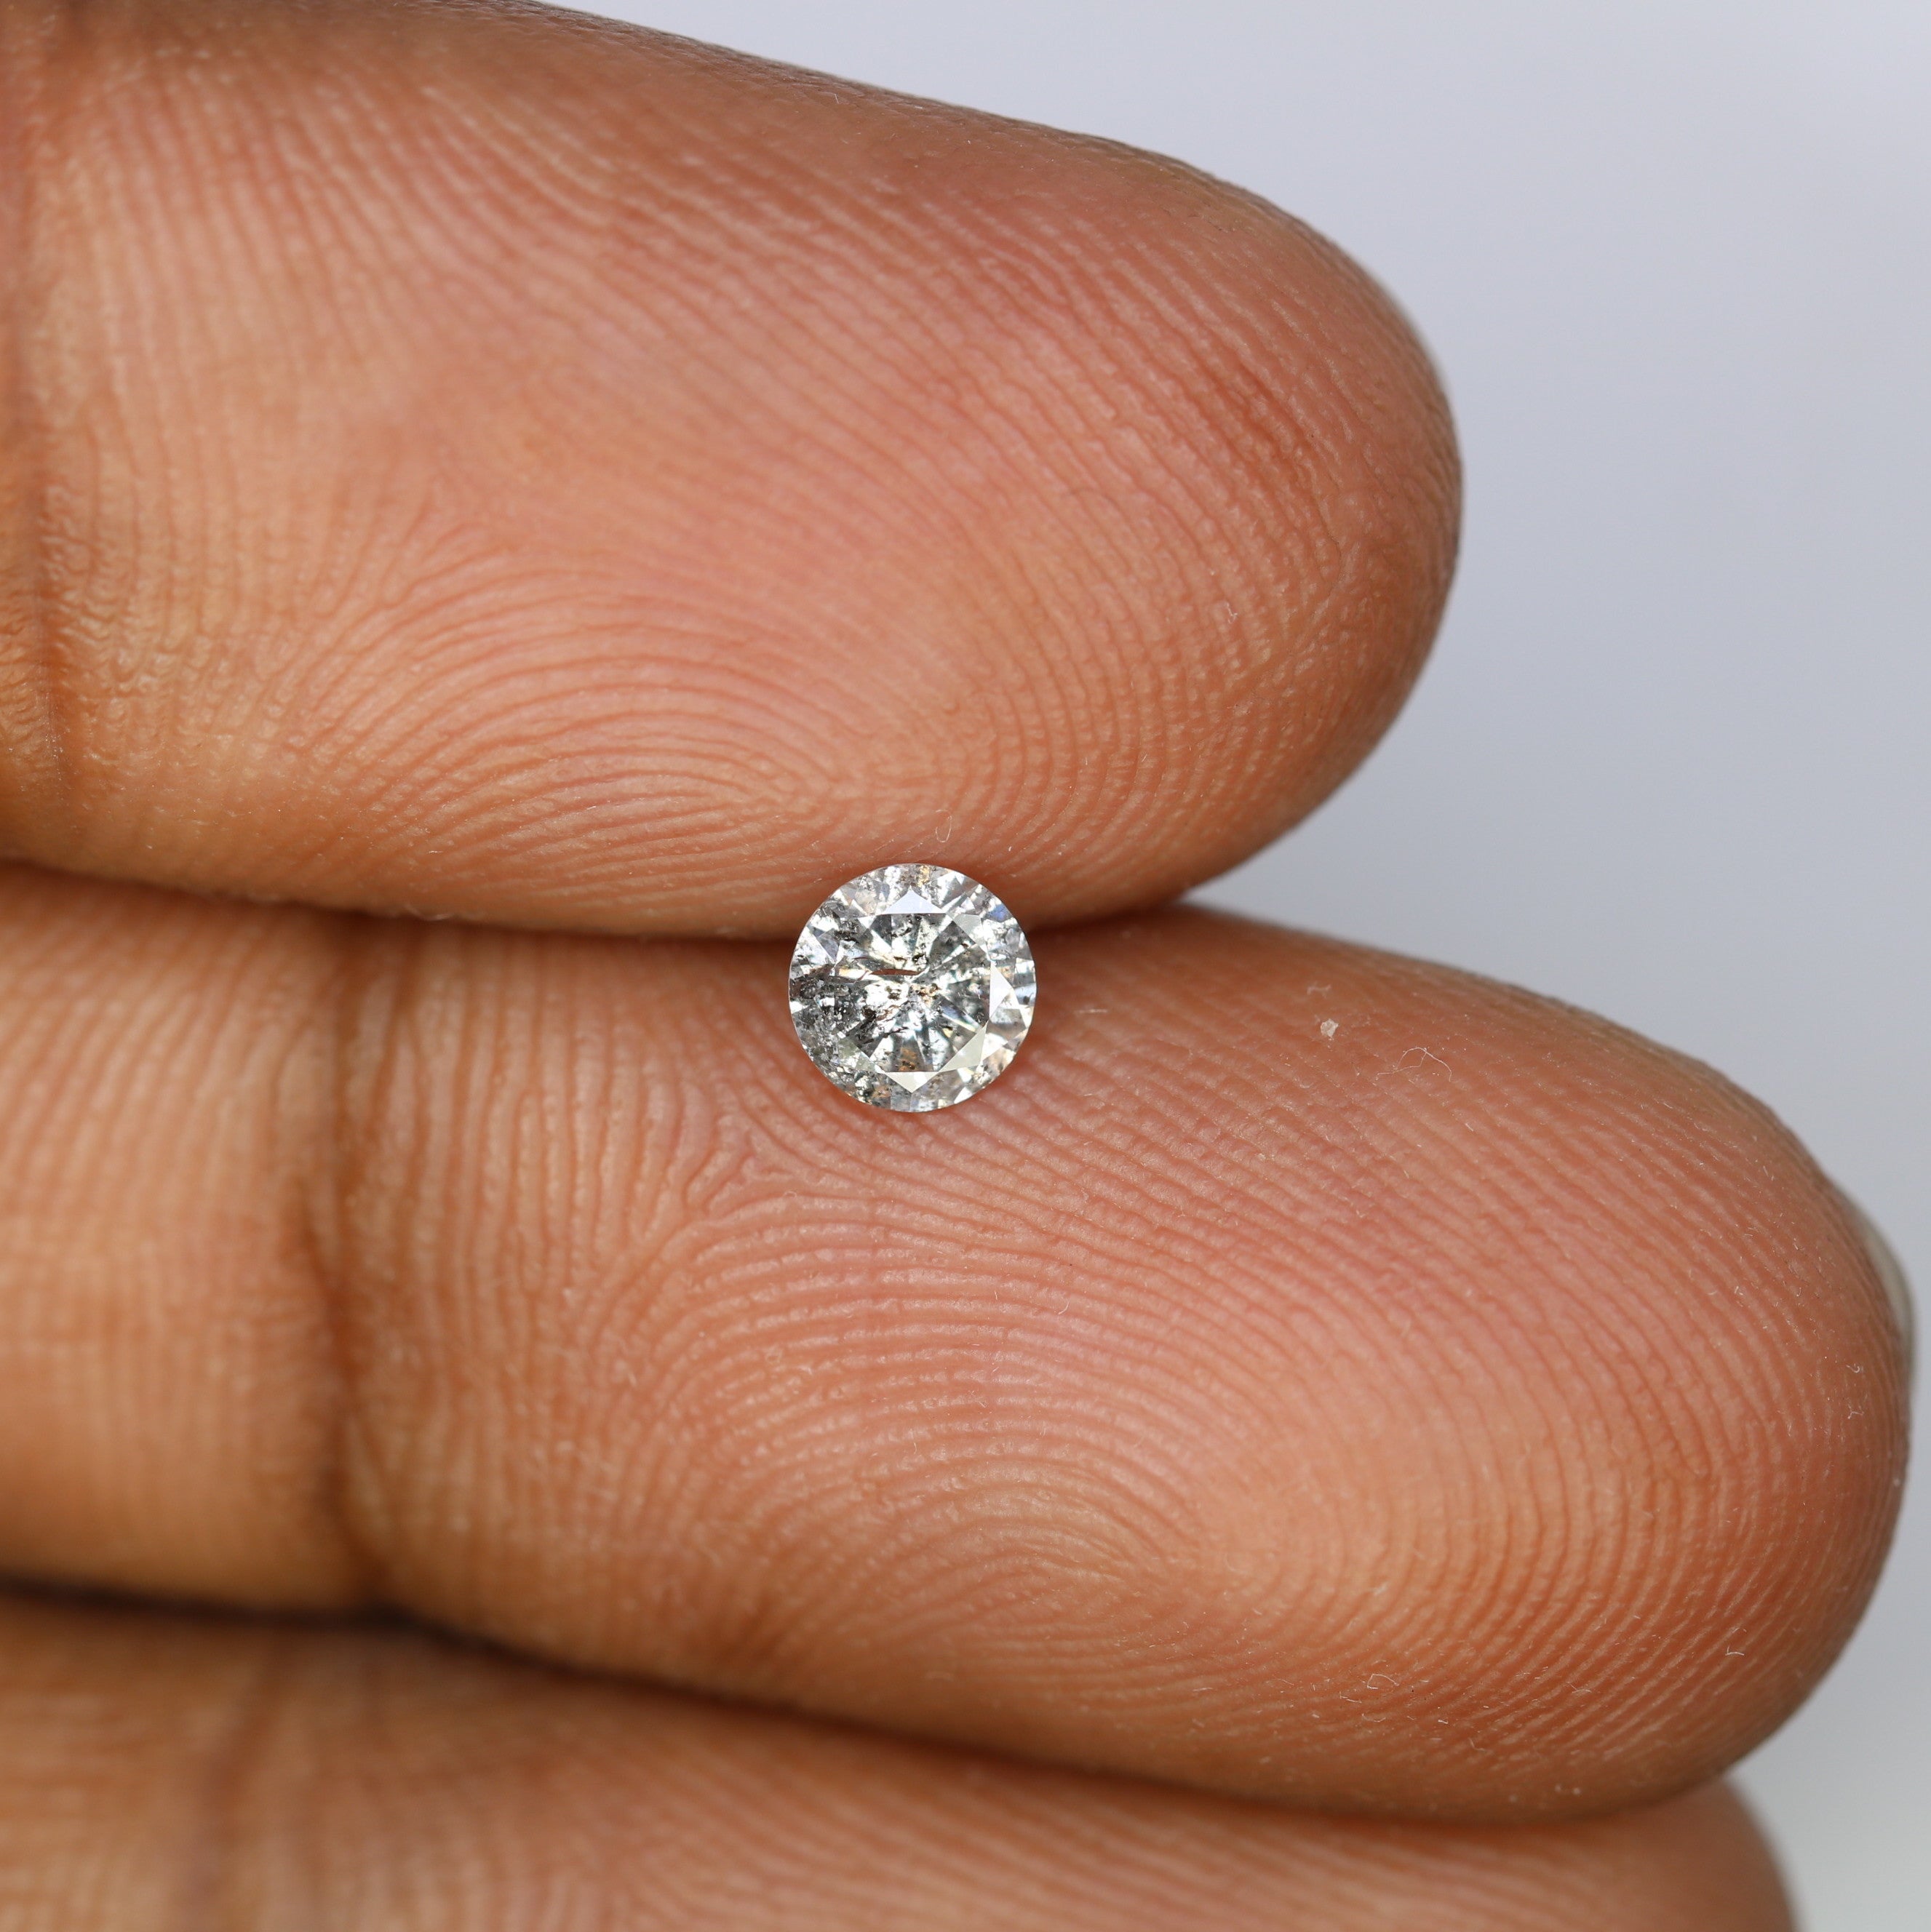 0.37 CT 4.60 MM Brilliant Cut Round Salt And Pepper Diamond For Engagement Ring